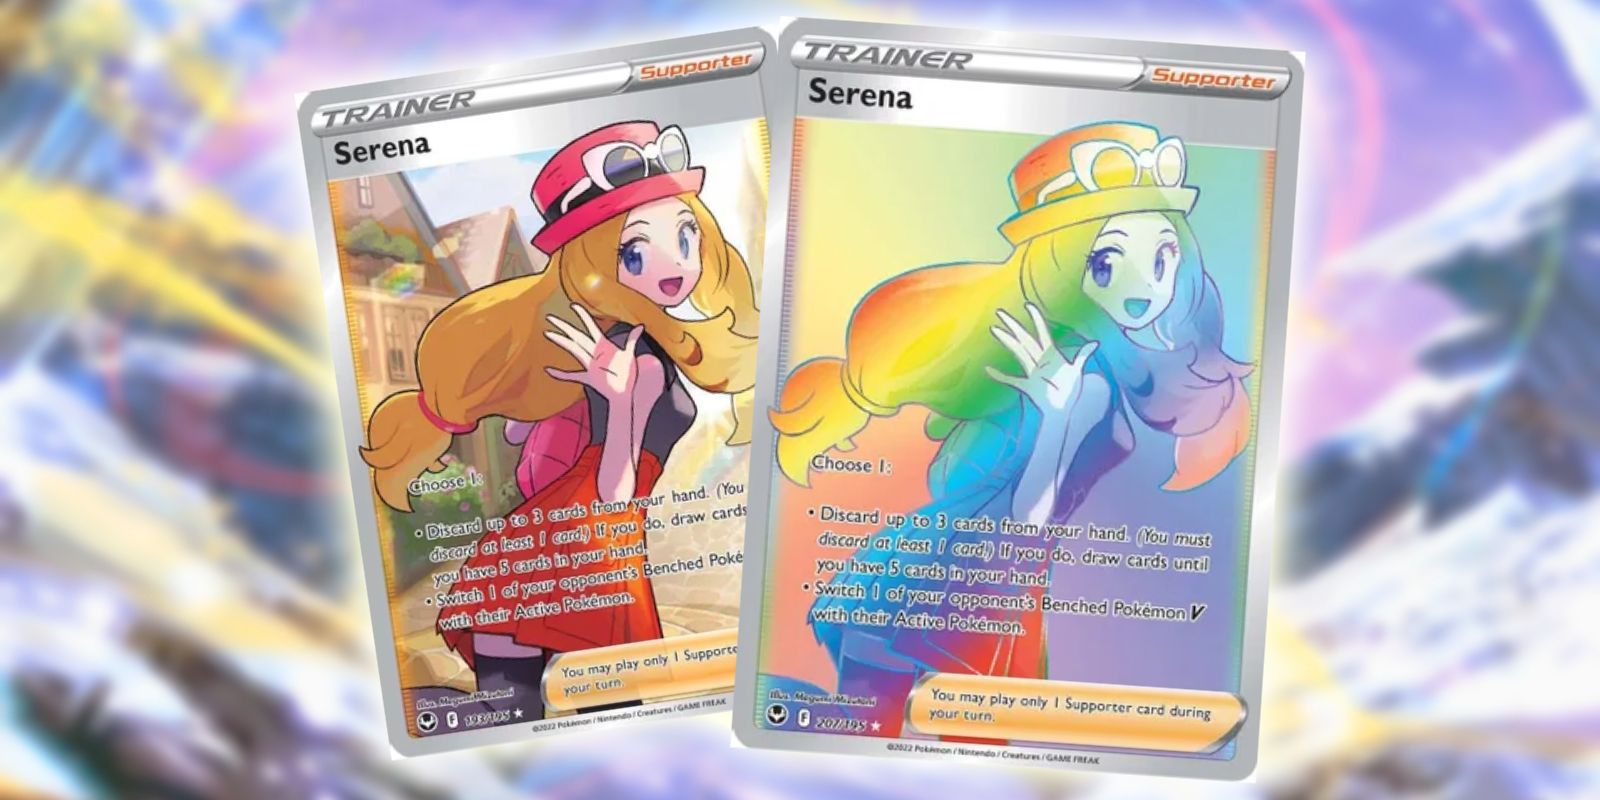 The Serena Trainer card and Secret card from Pokémon TCG's Silver Tempest expansion.